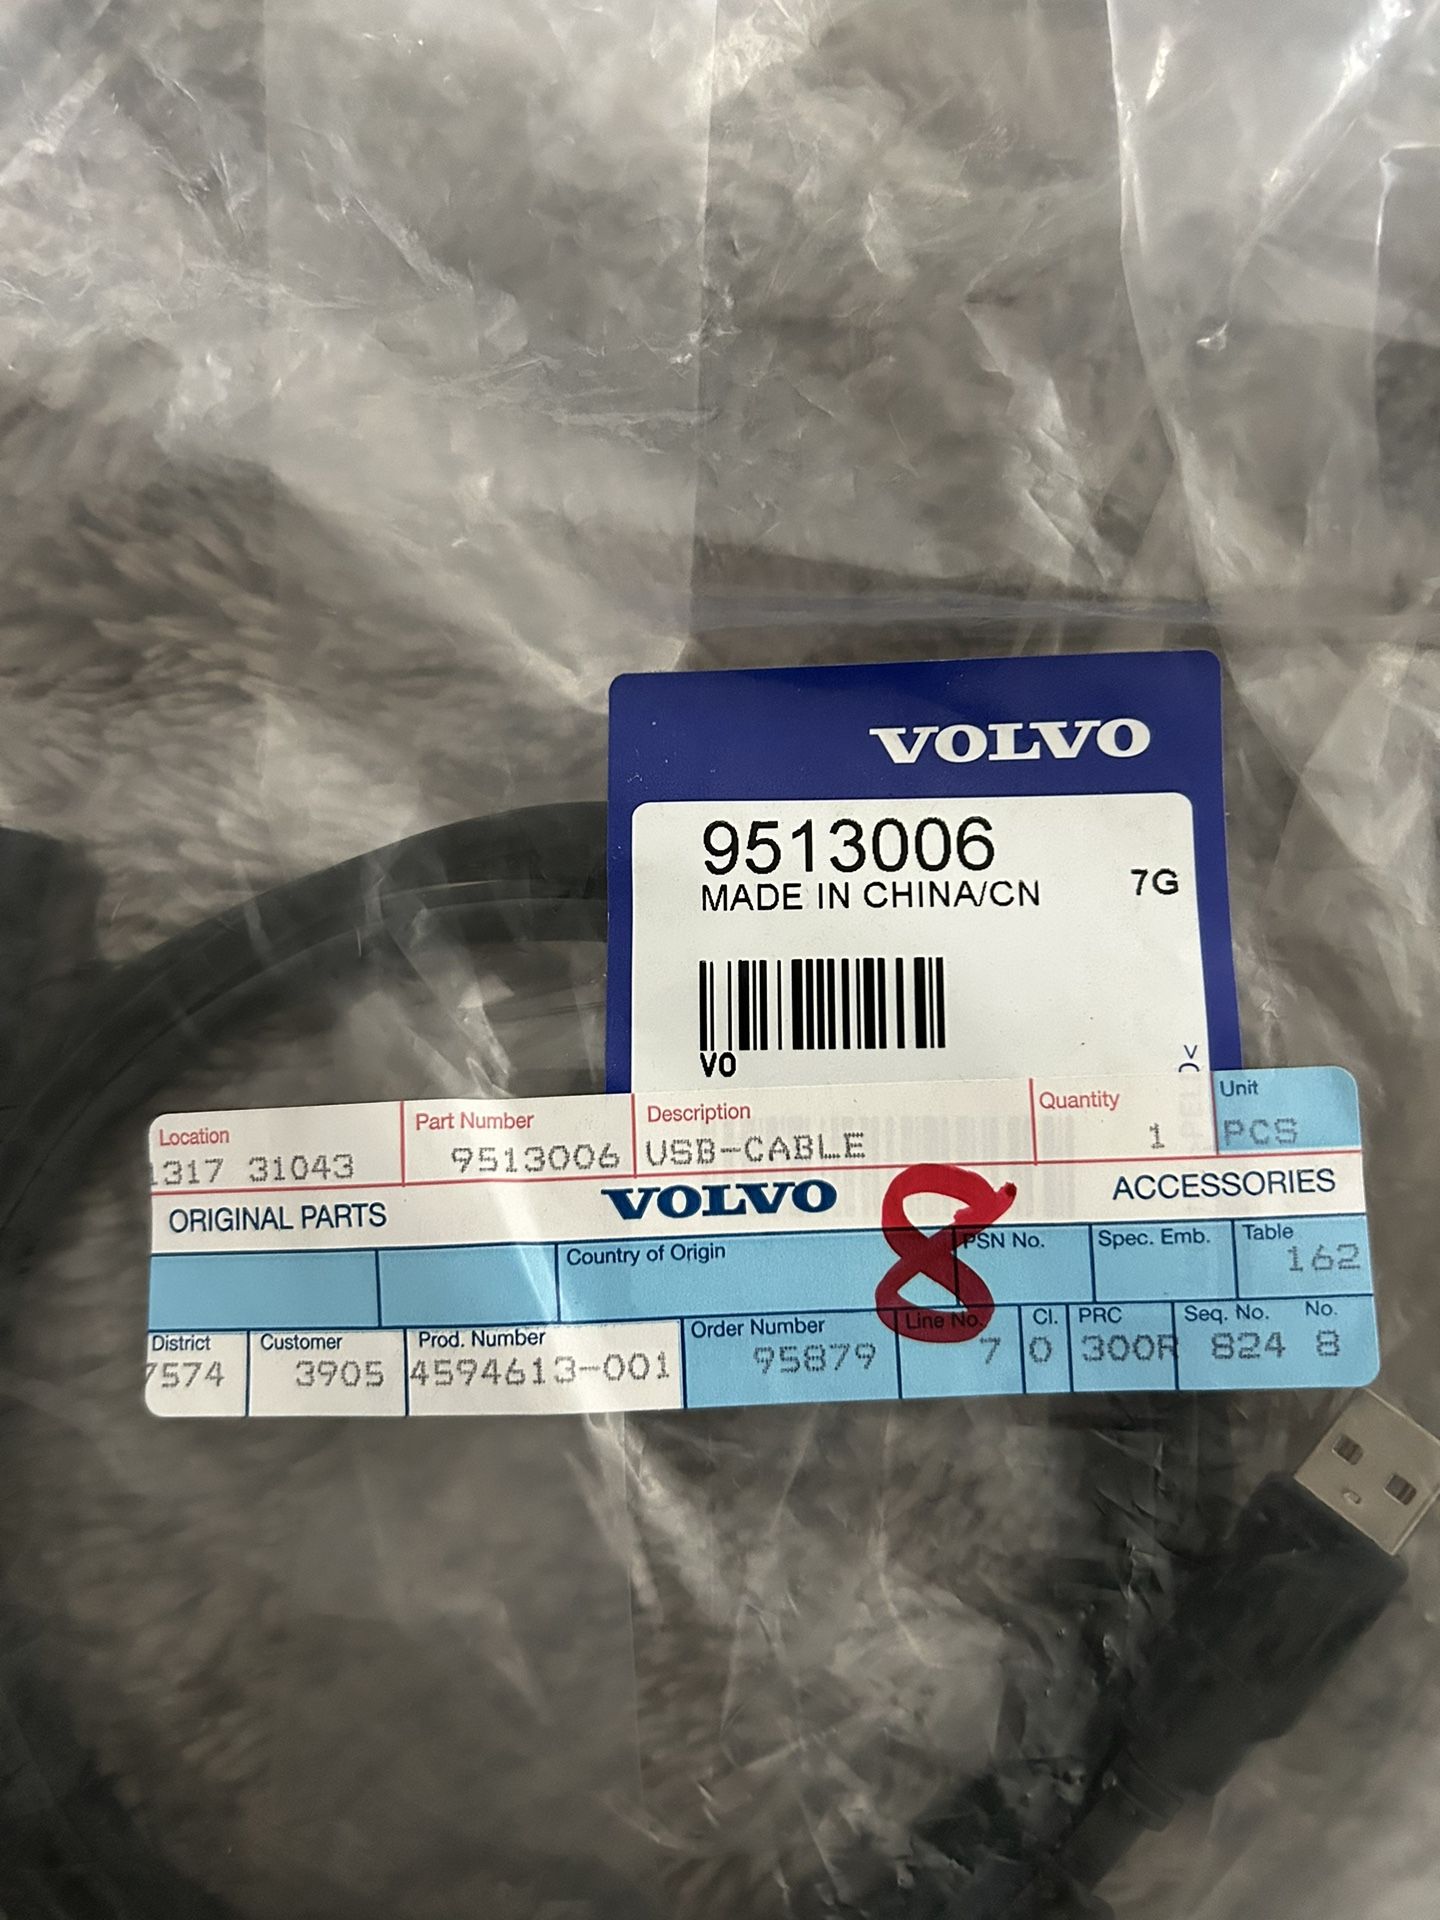 VOLVO USB CABLE